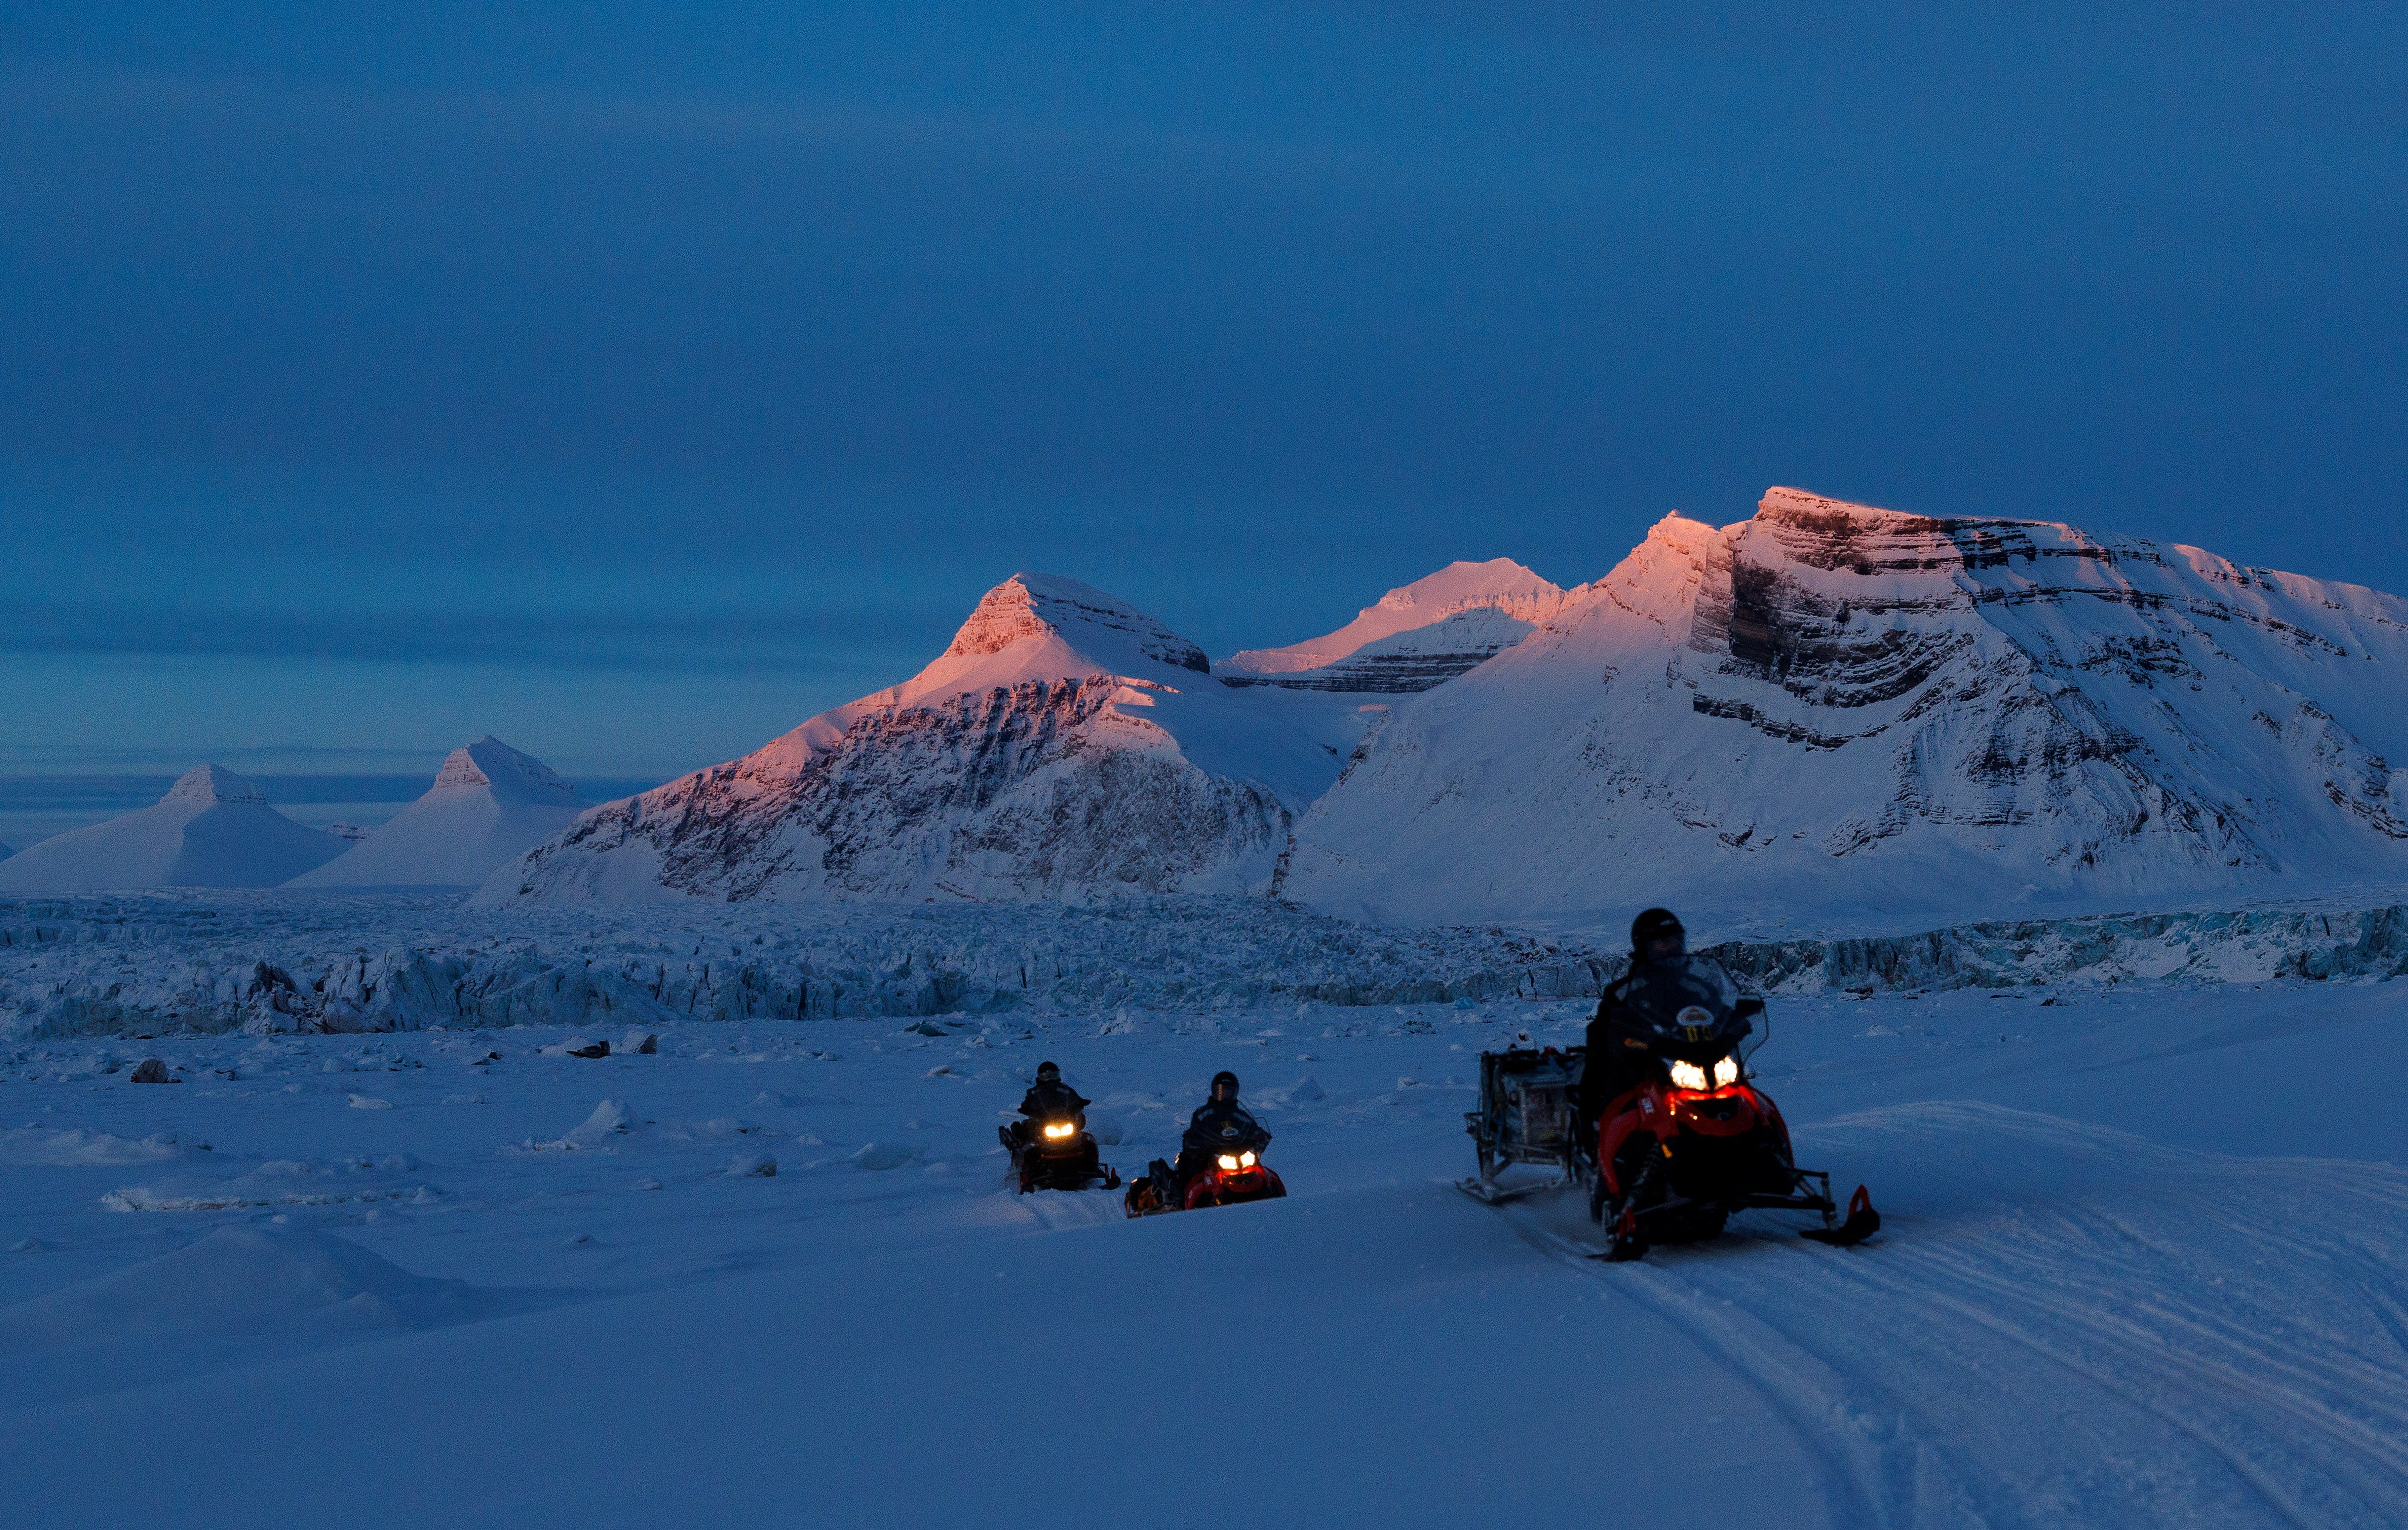 NPI (Norwegian Polar Institute) scientists ride their snowmobiles as the sun sets on Kongsfjord and Kronebreen glaciers